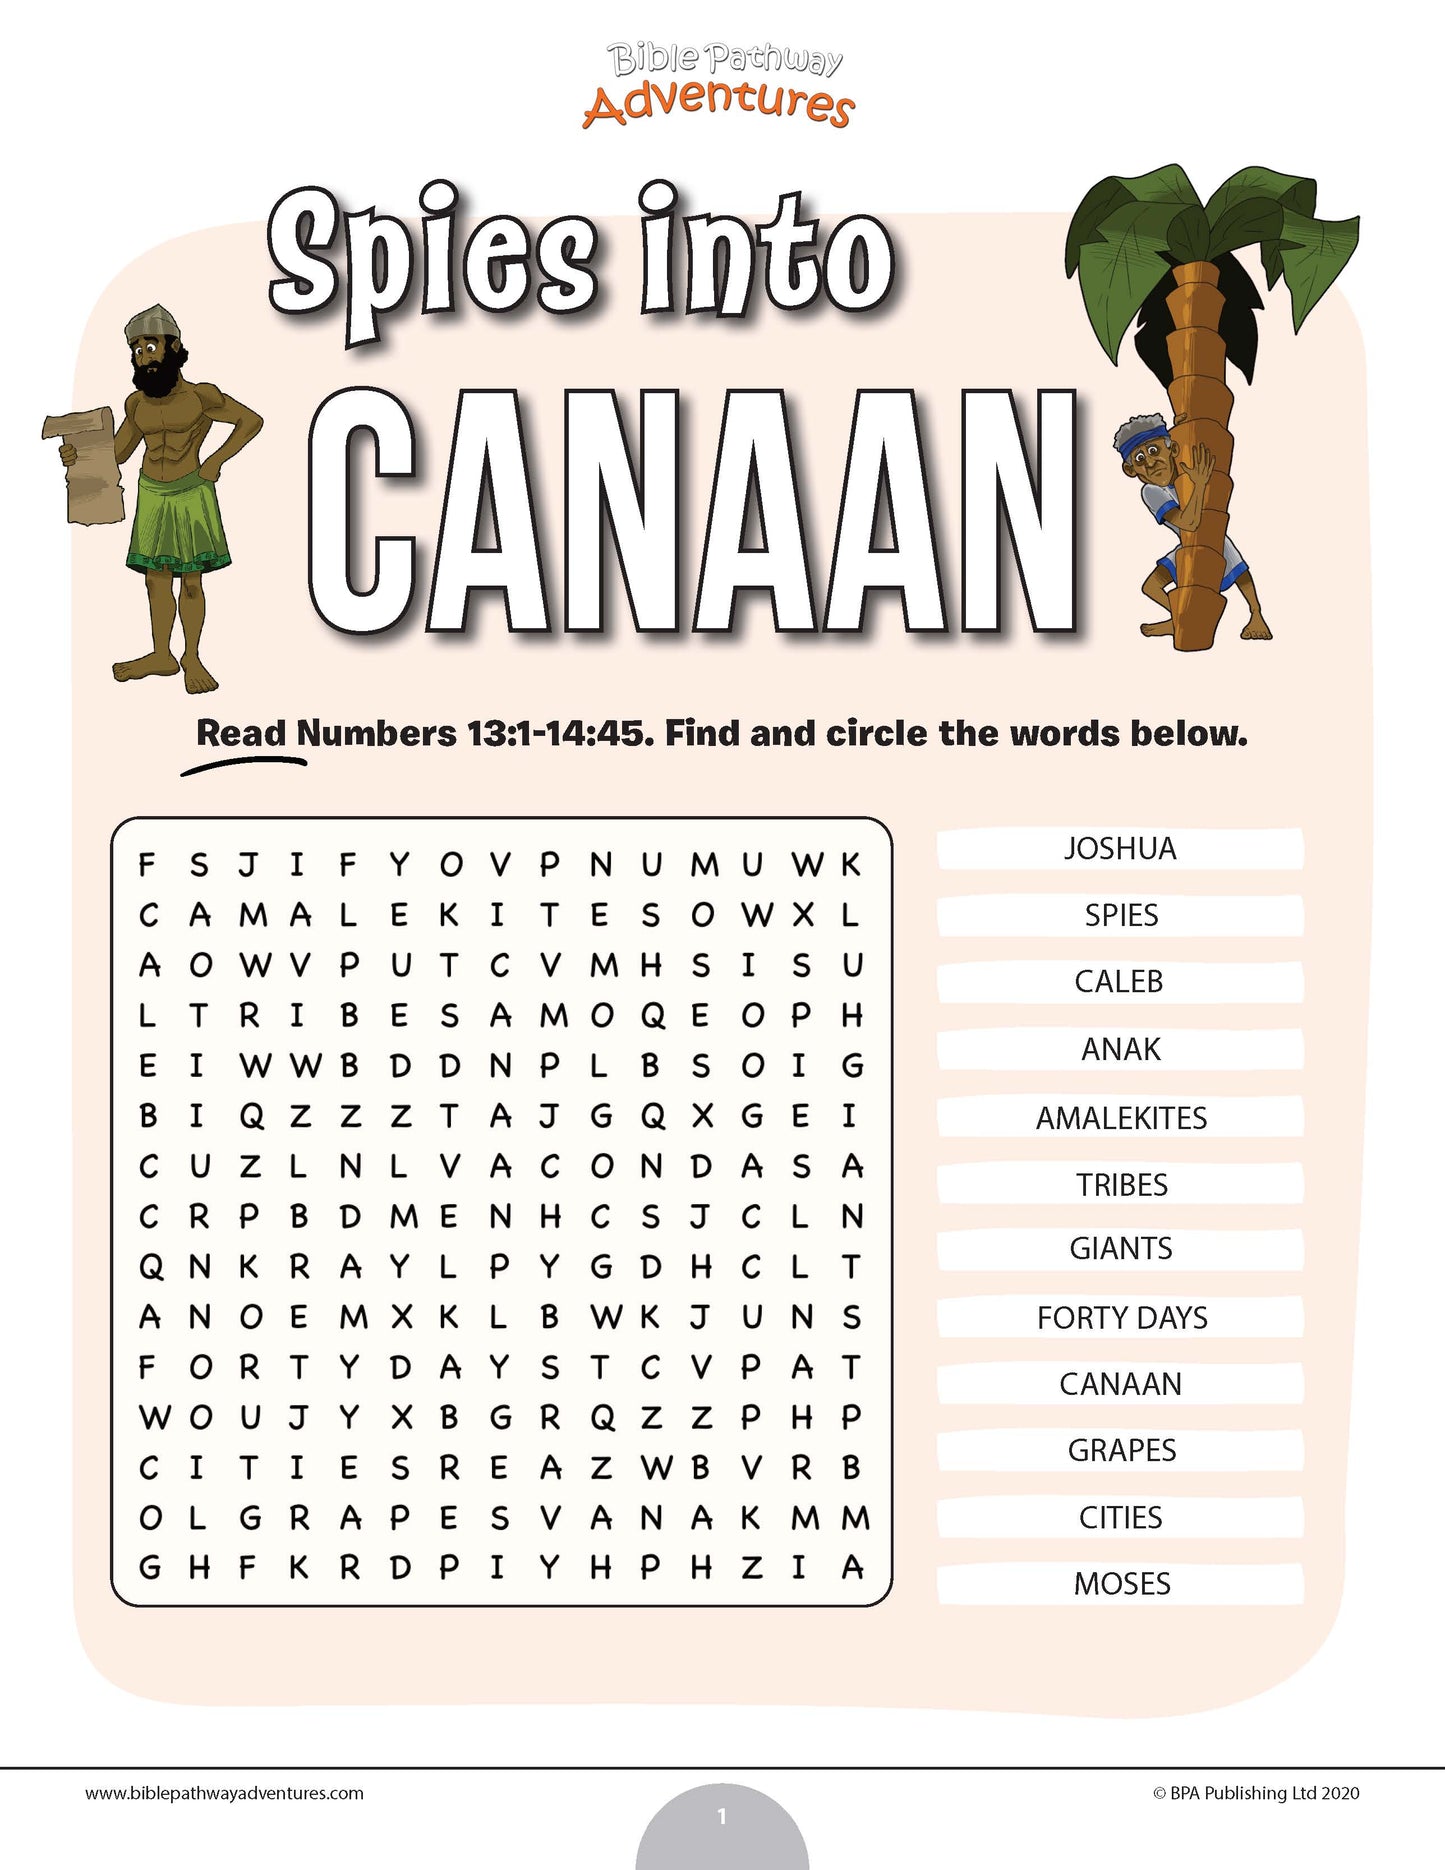 Spies into Canaan word search (PDF)